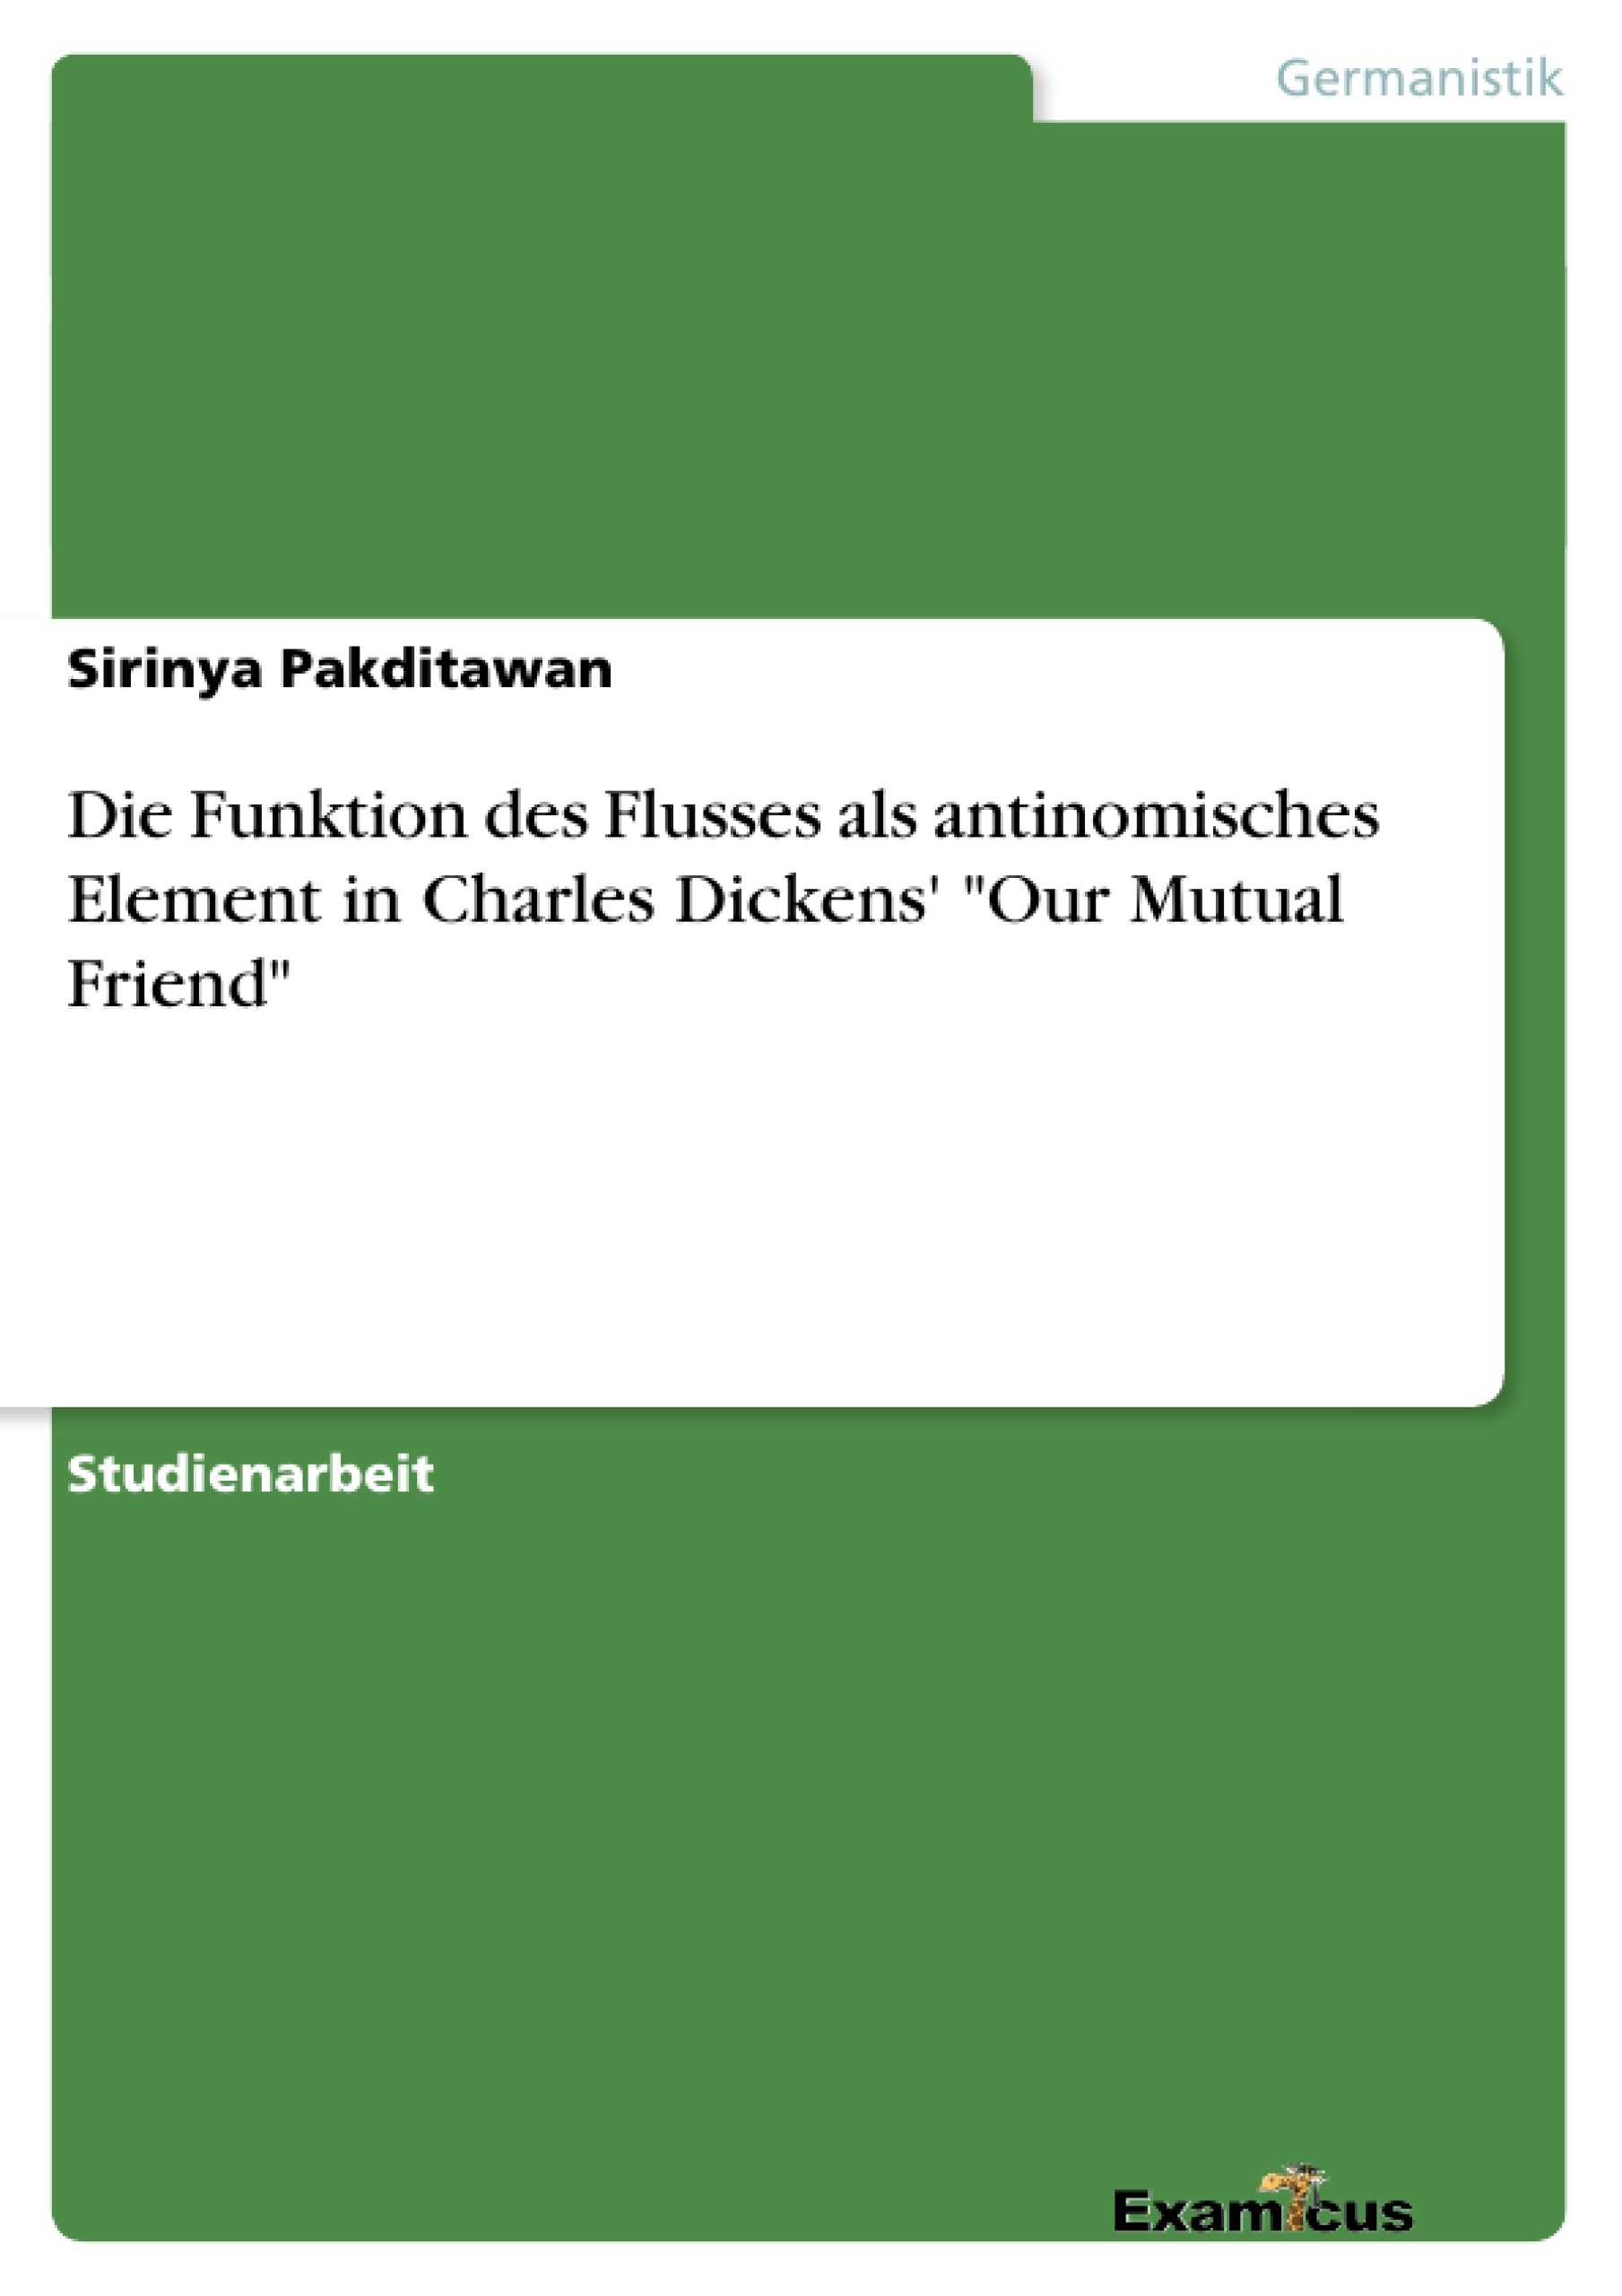 Titre: Die Funktion des Flusses als antinomisches Element in Charles Dickens' "Our Mutual Friend"